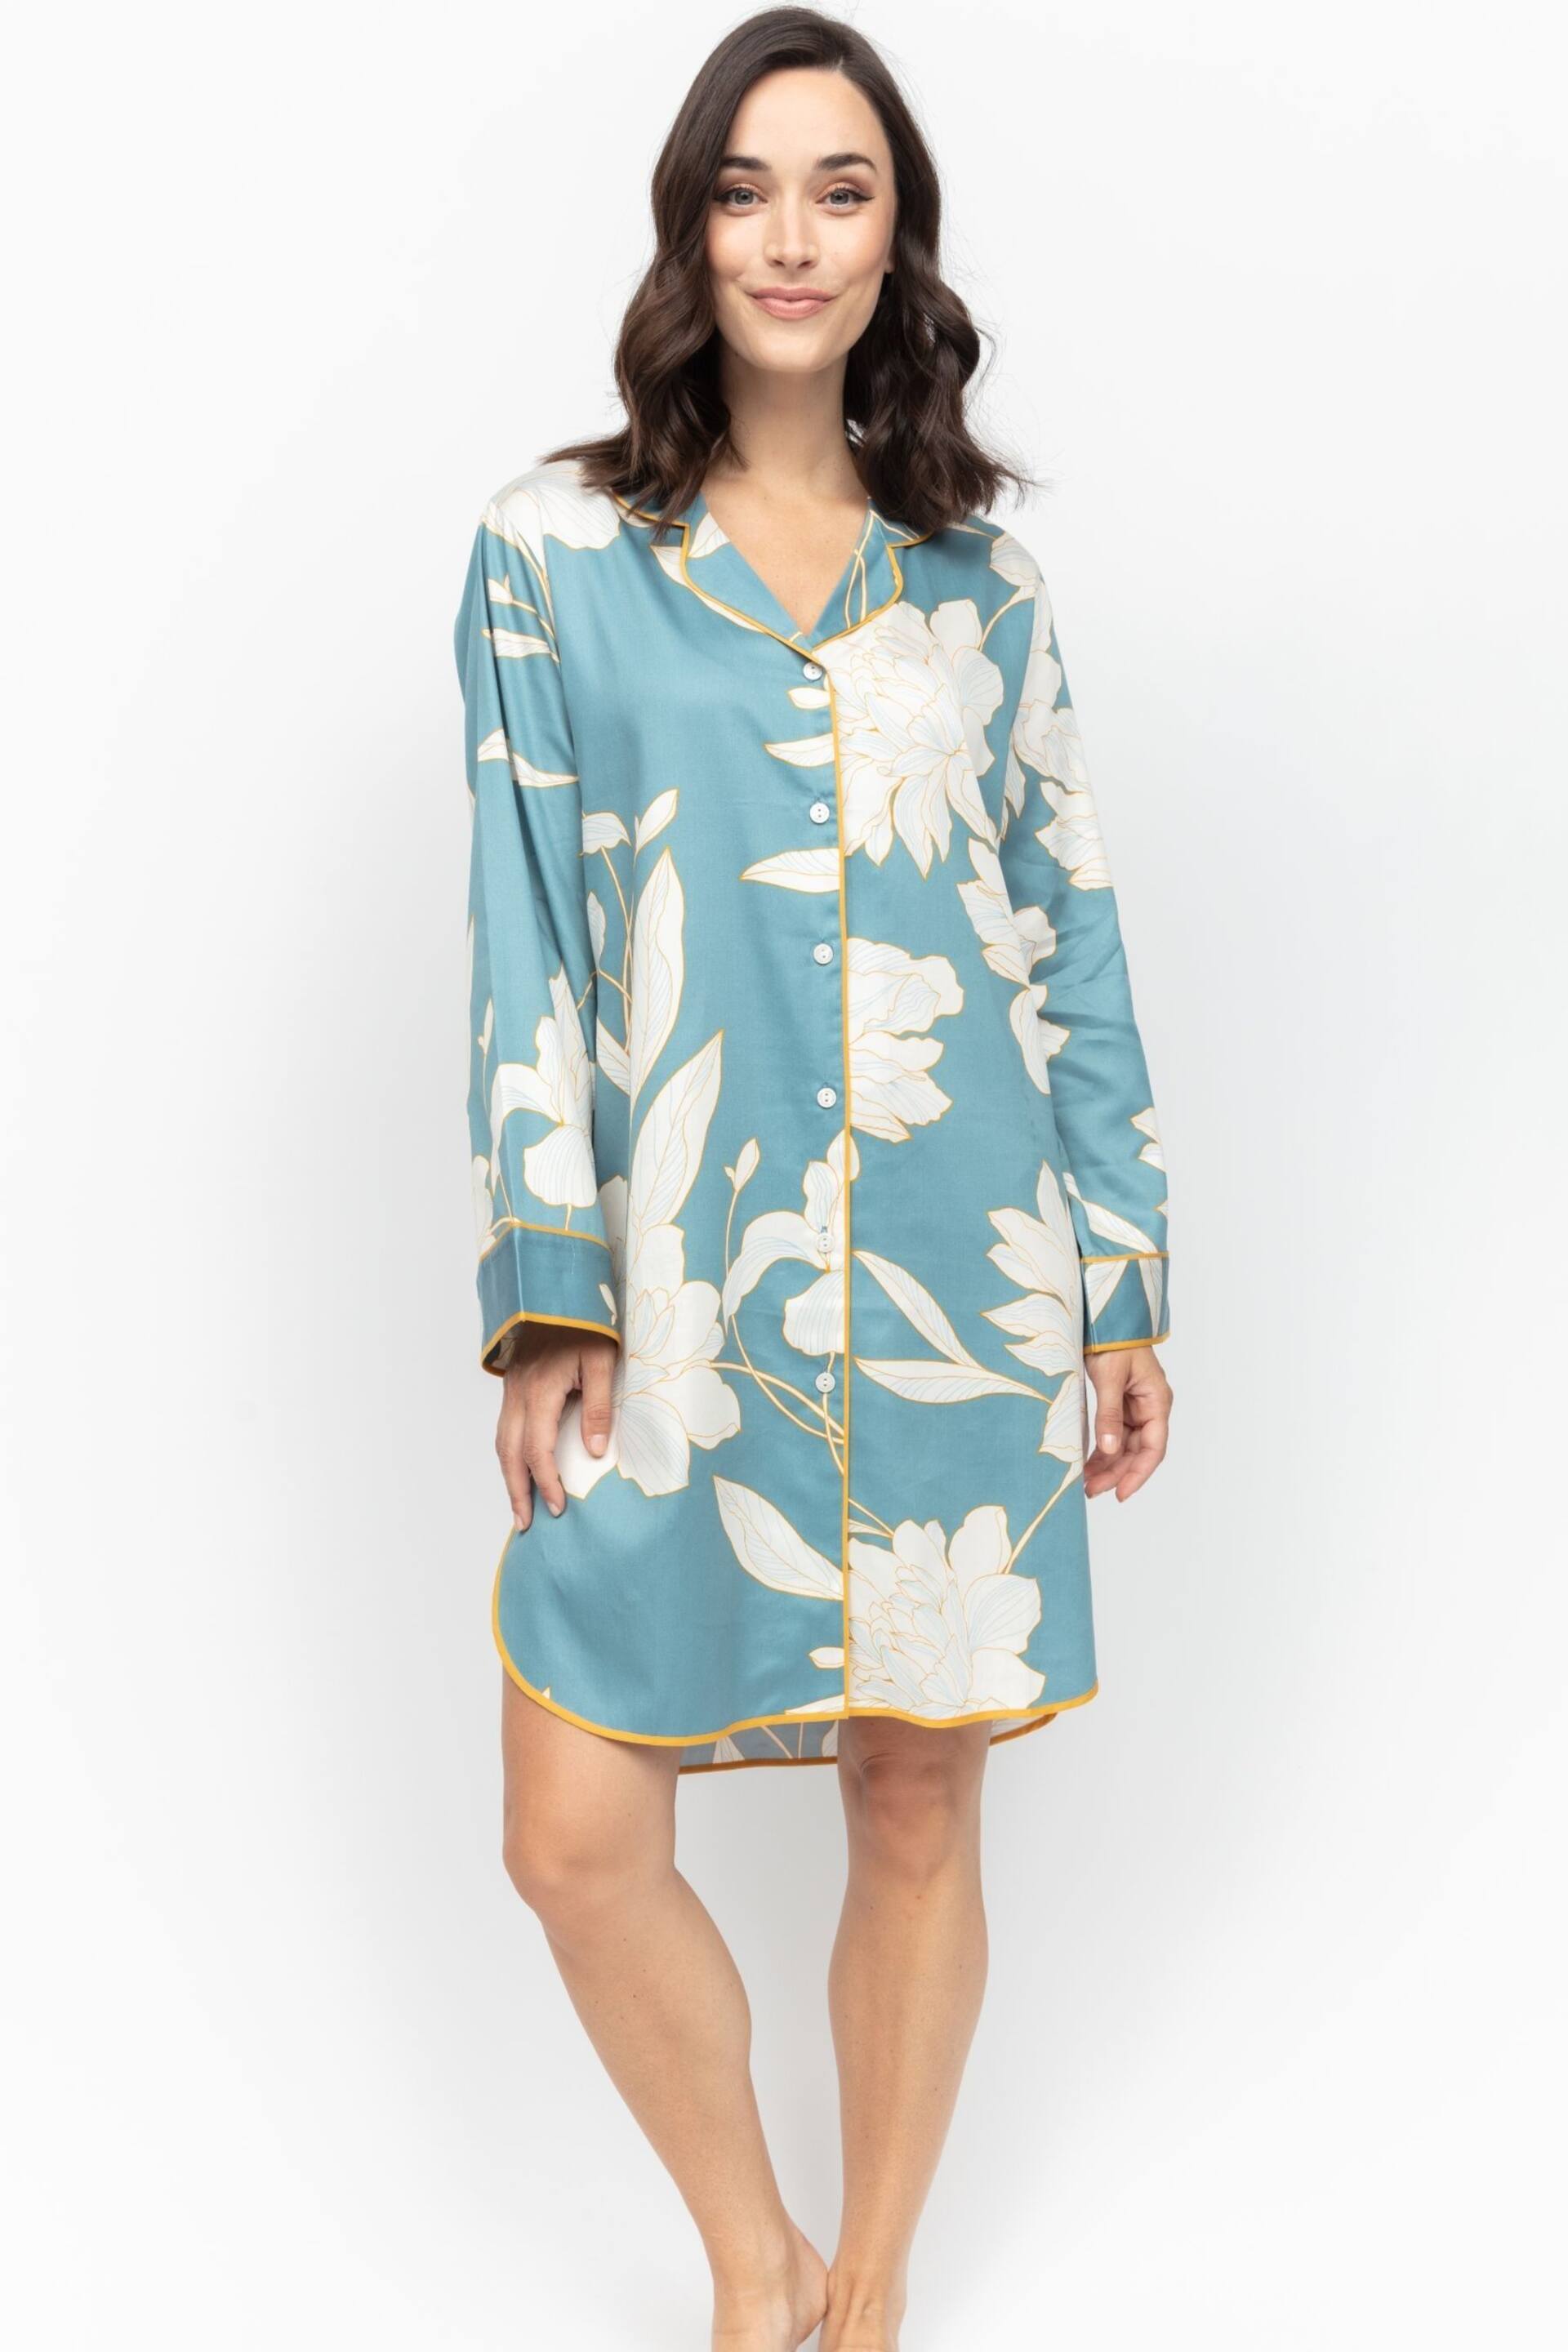 Fable and Eve Blue Floral Print Long Sleeve Nightshirt - Image 2 of 4